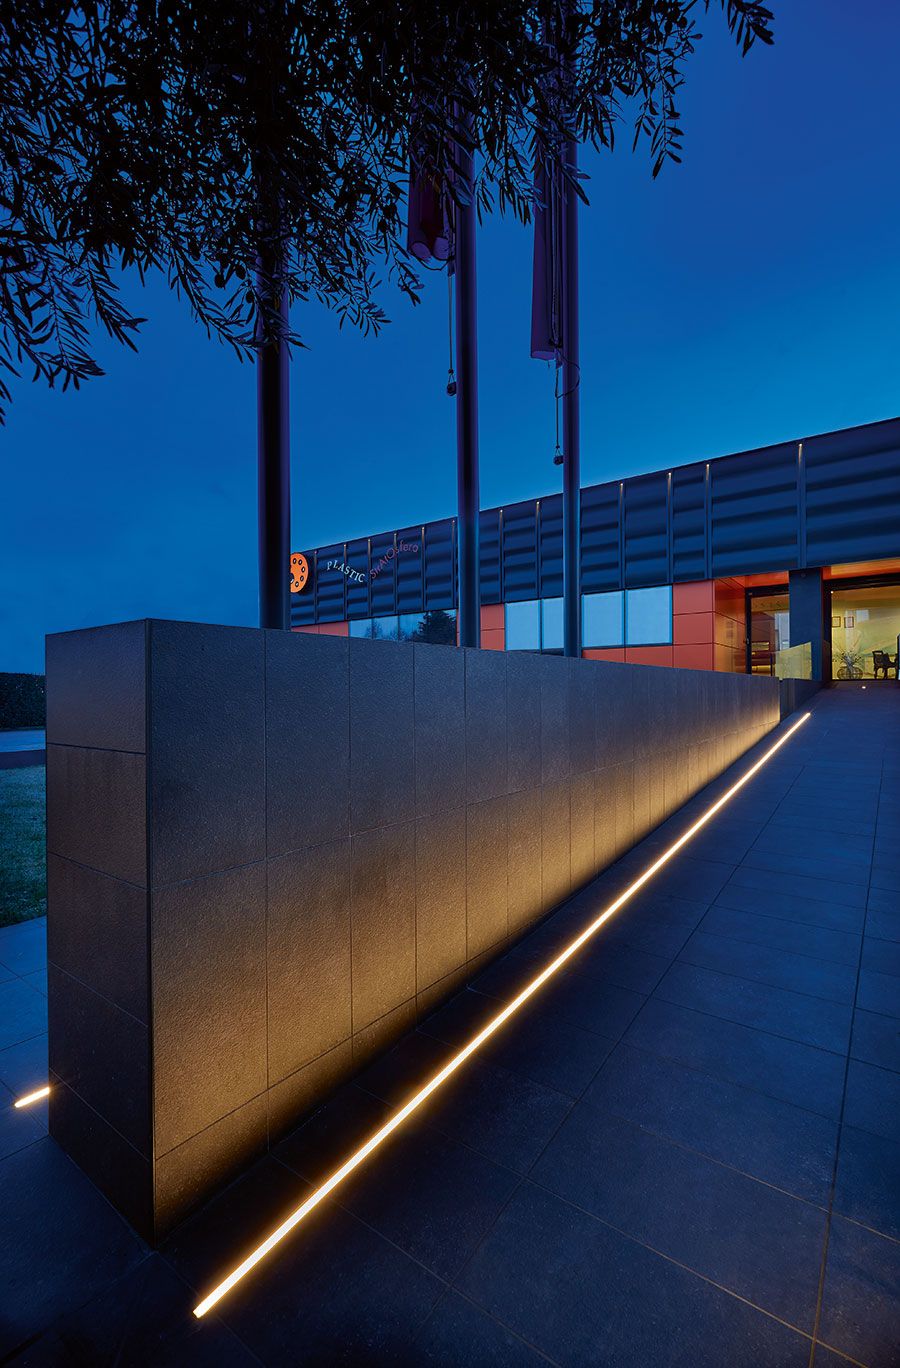 Illuminate Your Outdoor Space with Stunning Landscape Lighting